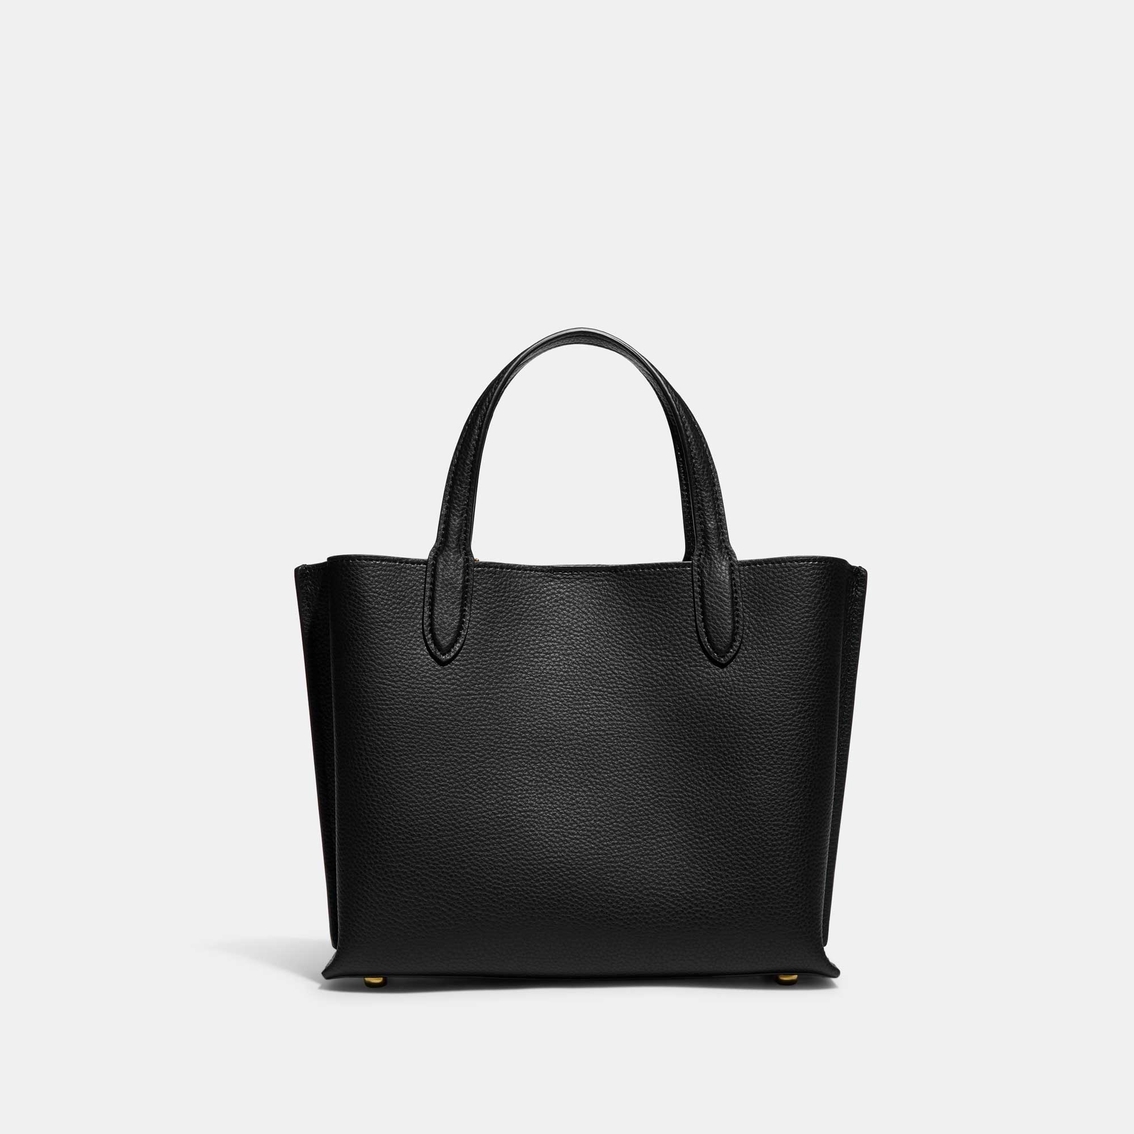 COACH Polished Pebble Leather Willow Tote 24 - Image 2 of 8